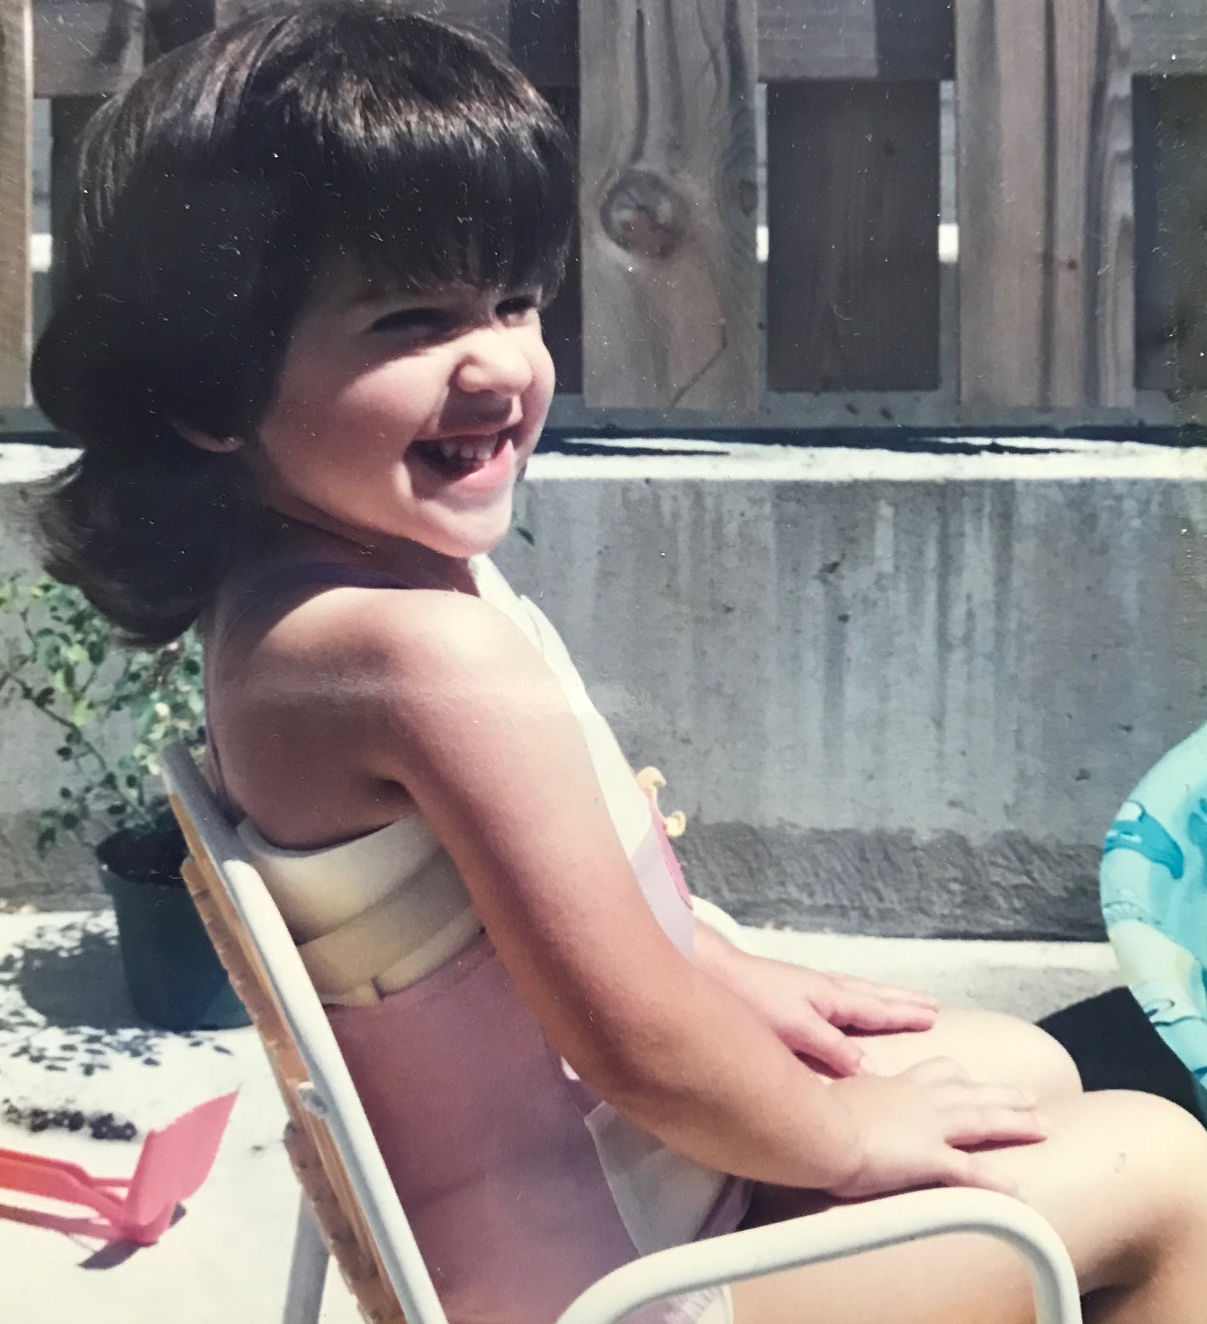 A young girl sits on a chair besides a pool. She has short dark hair and is wearing a chest brace. She is grinning.